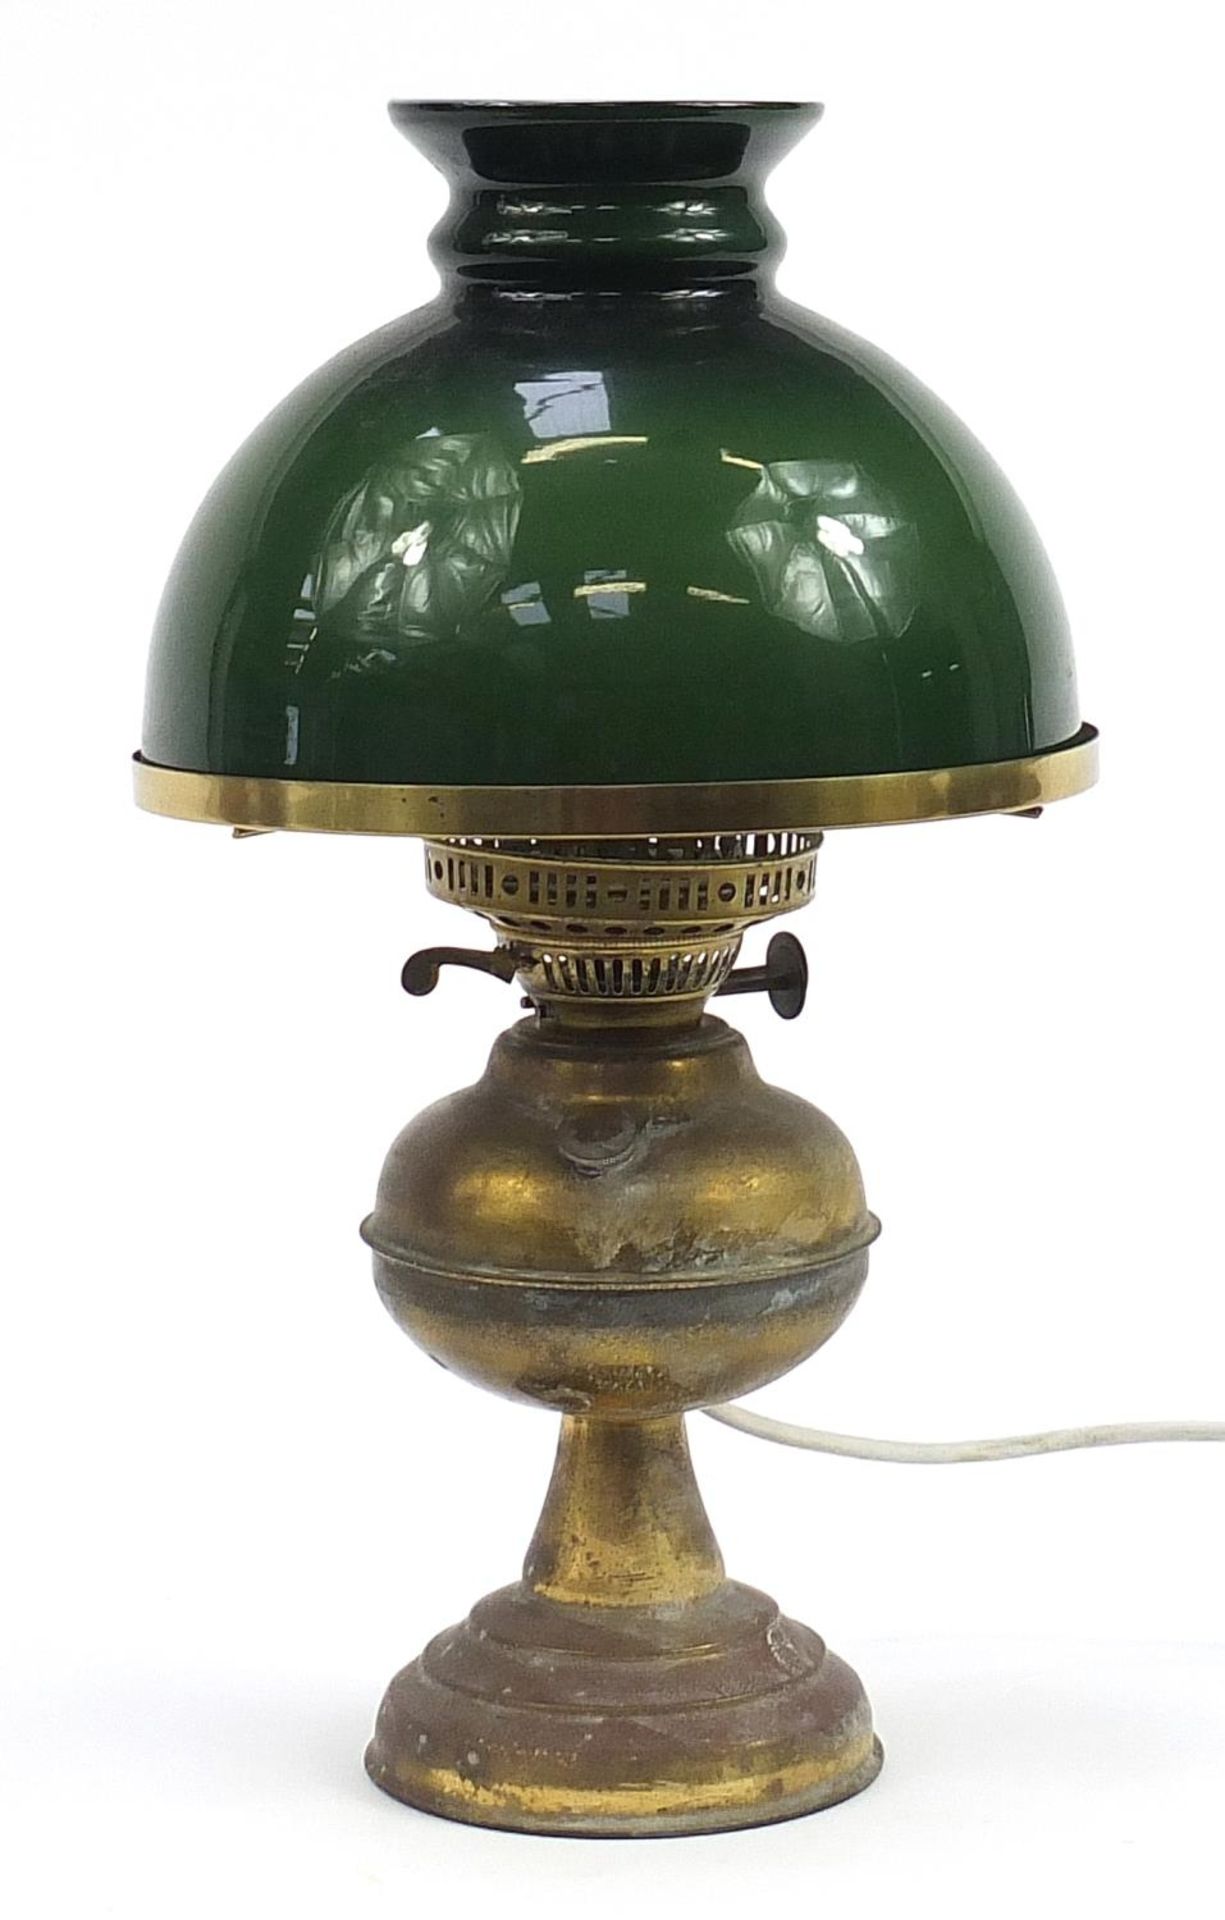 Victorian brass oil lamp with green glass shade converted to electric, 45cm high